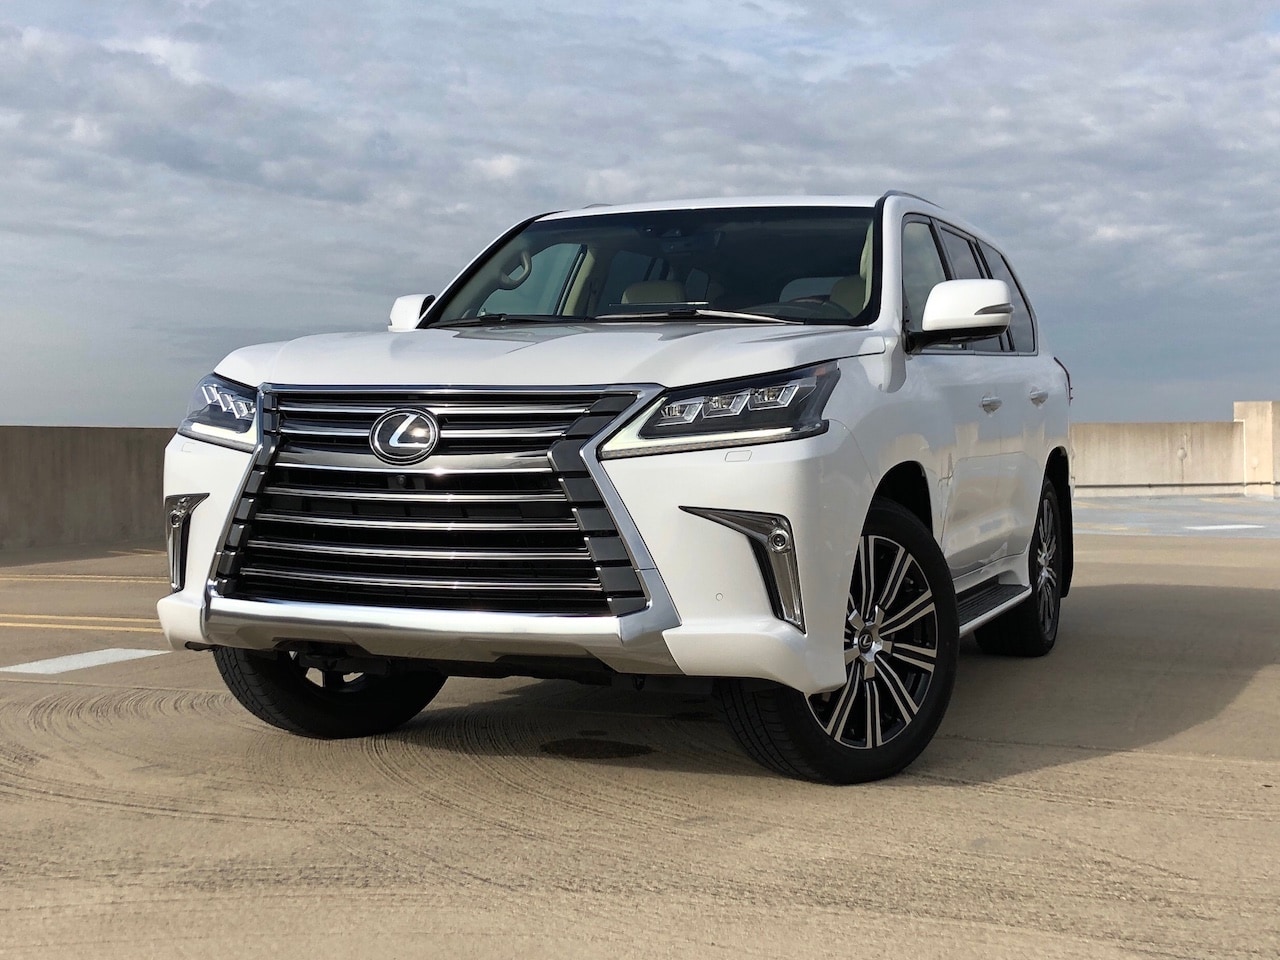 See the body of the 2019 Lexus LX 570